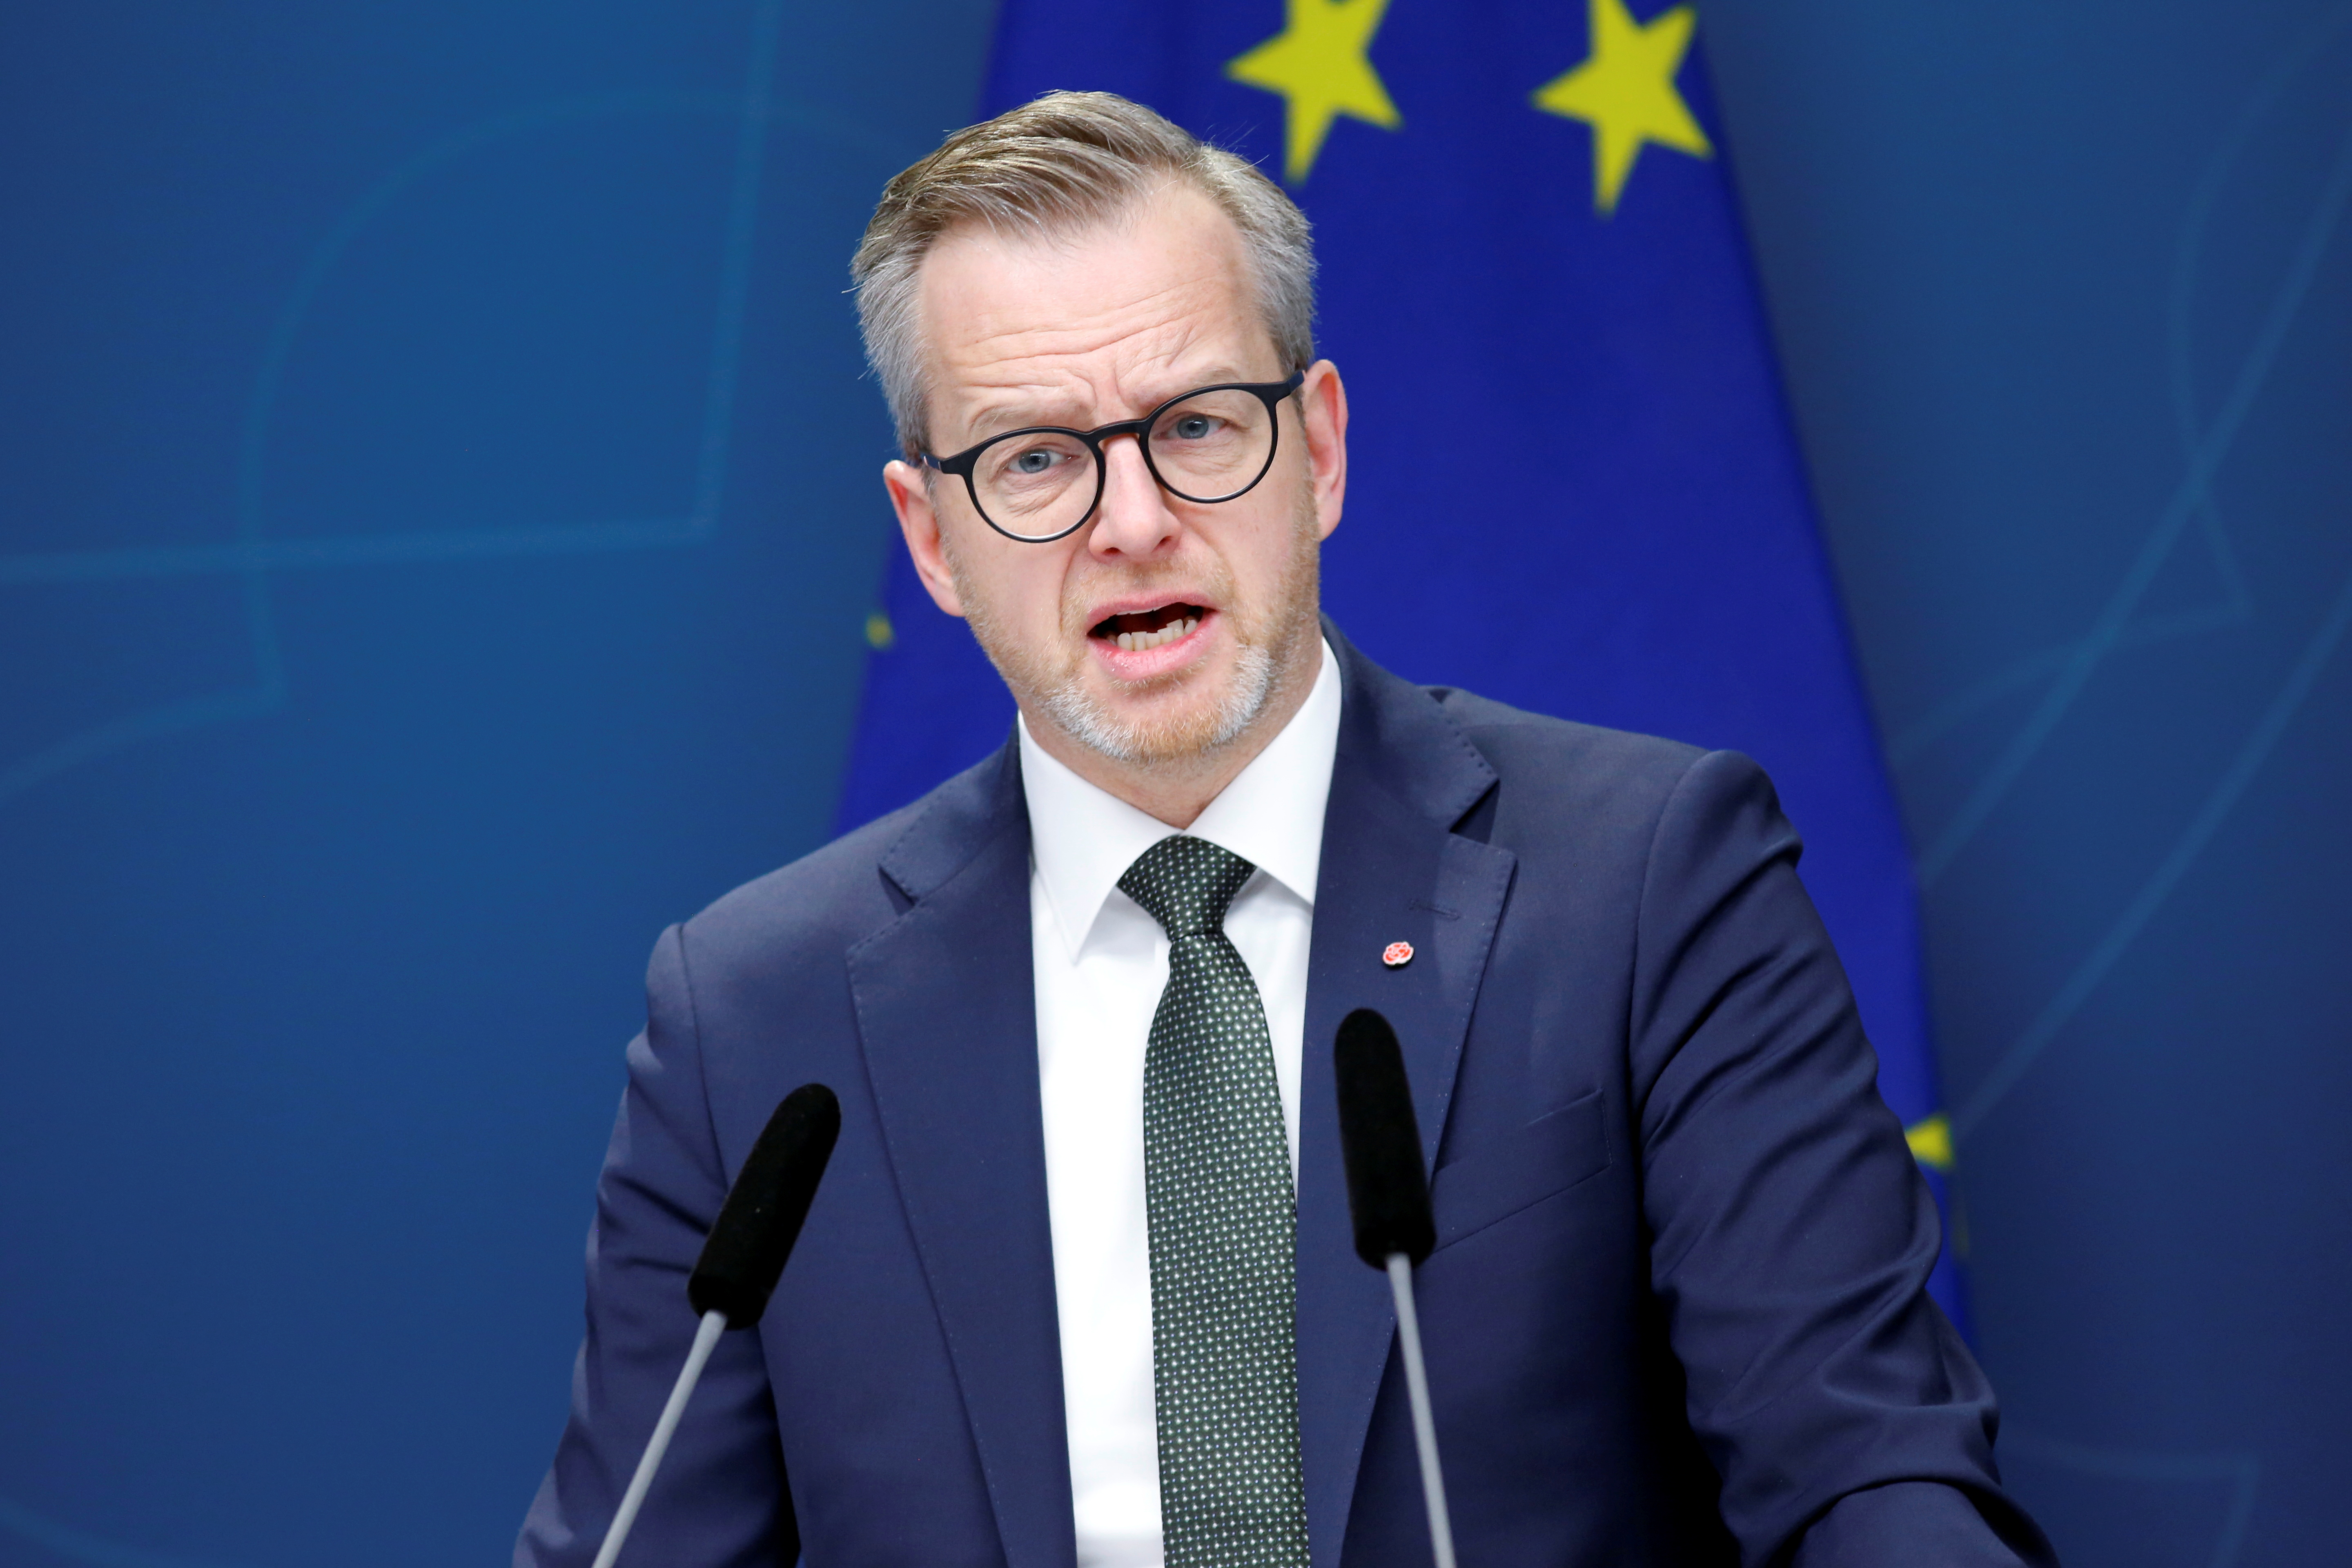 Swedish Finance Minister Mikael Damberg attends a press conference to propose relief for households affected by high electricity prices, in Rosenbad